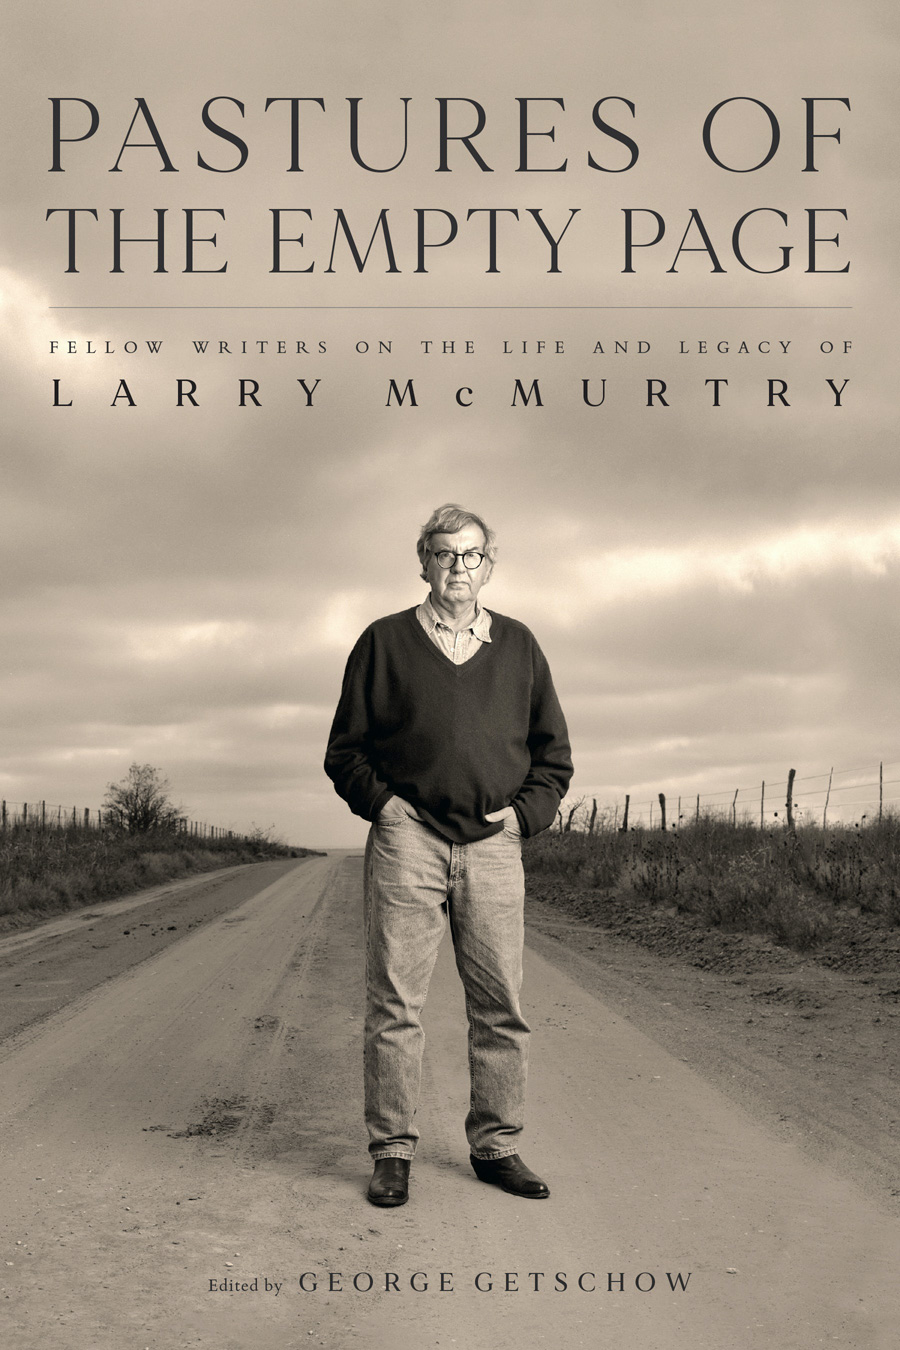 Pastures of the Empty Page book cover